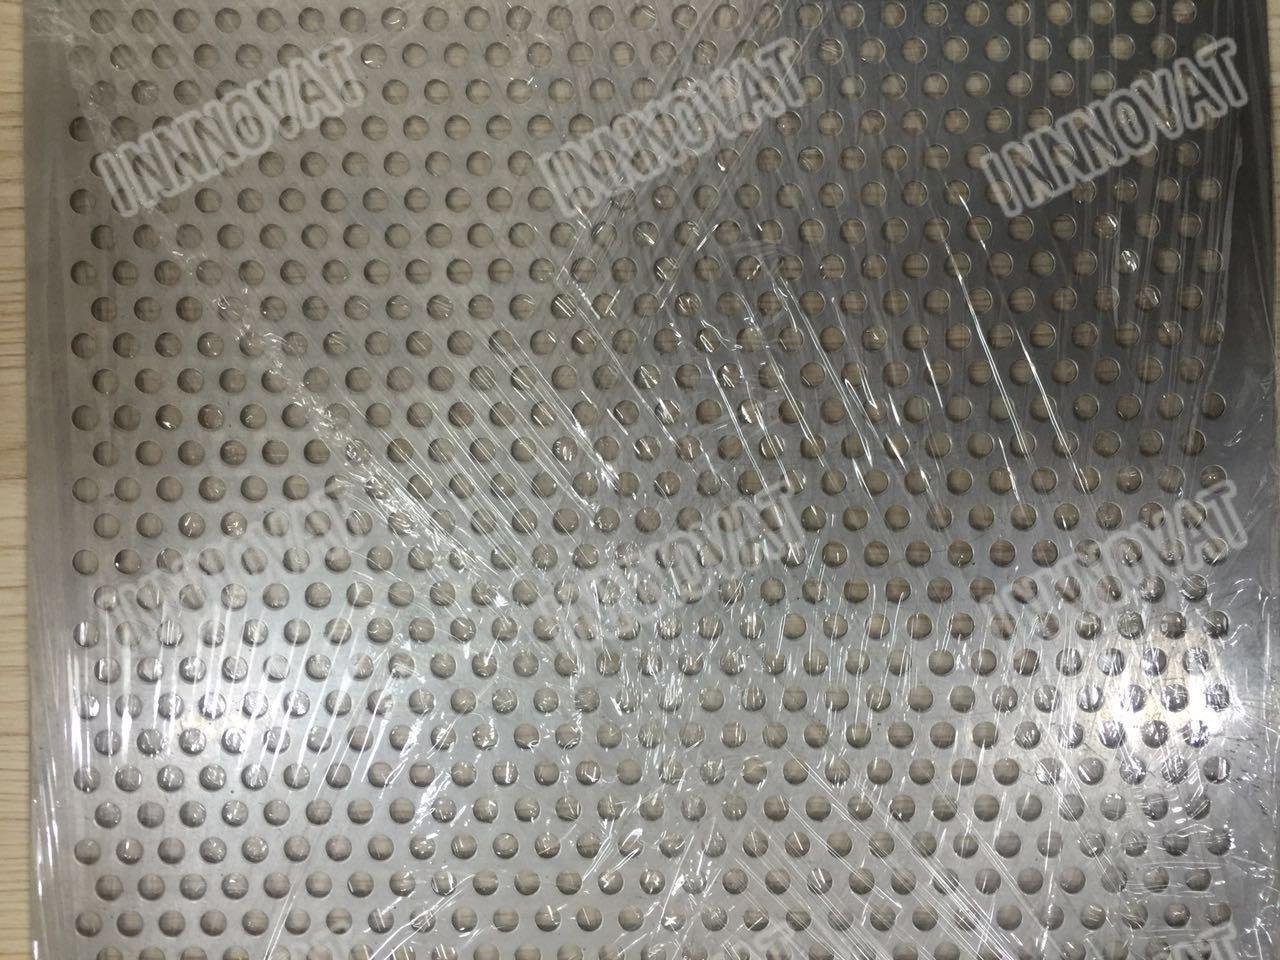 Round Hole Perforated Stainless Steel 304 Plate Length 1m Perforated Mesh Sheet 3